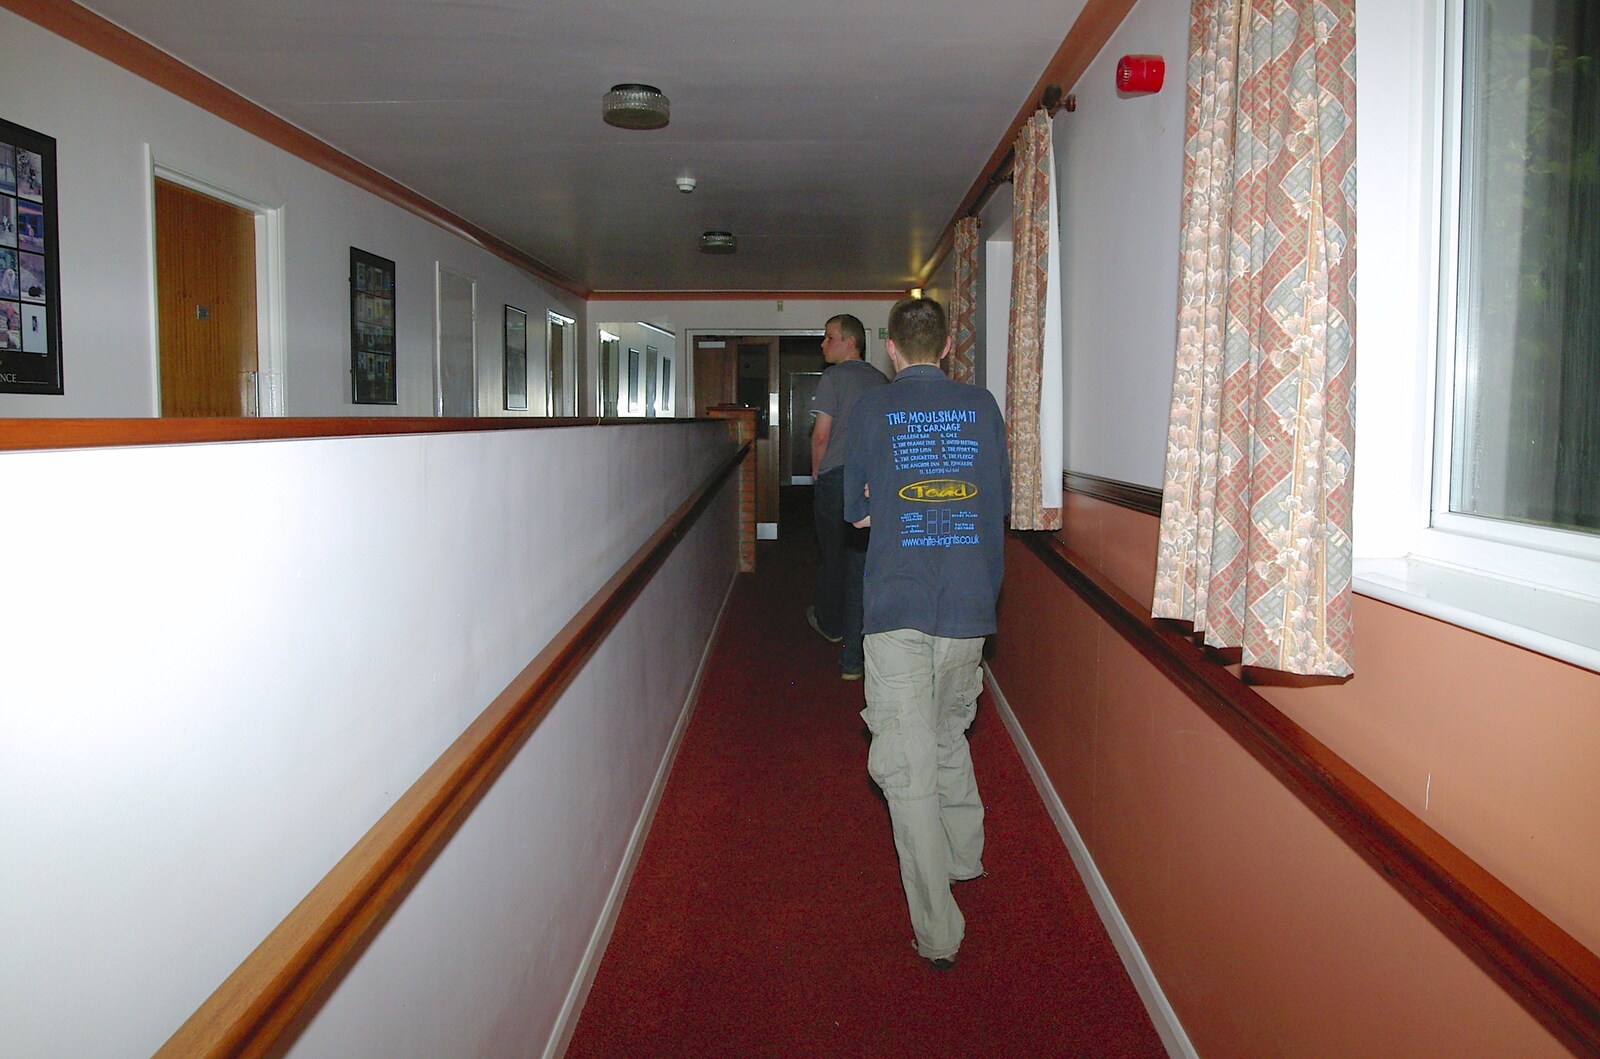 We head back to the rooms from The BSCC does The Pheasant Hotel, Kelling, Norfolk - 6th May 2006